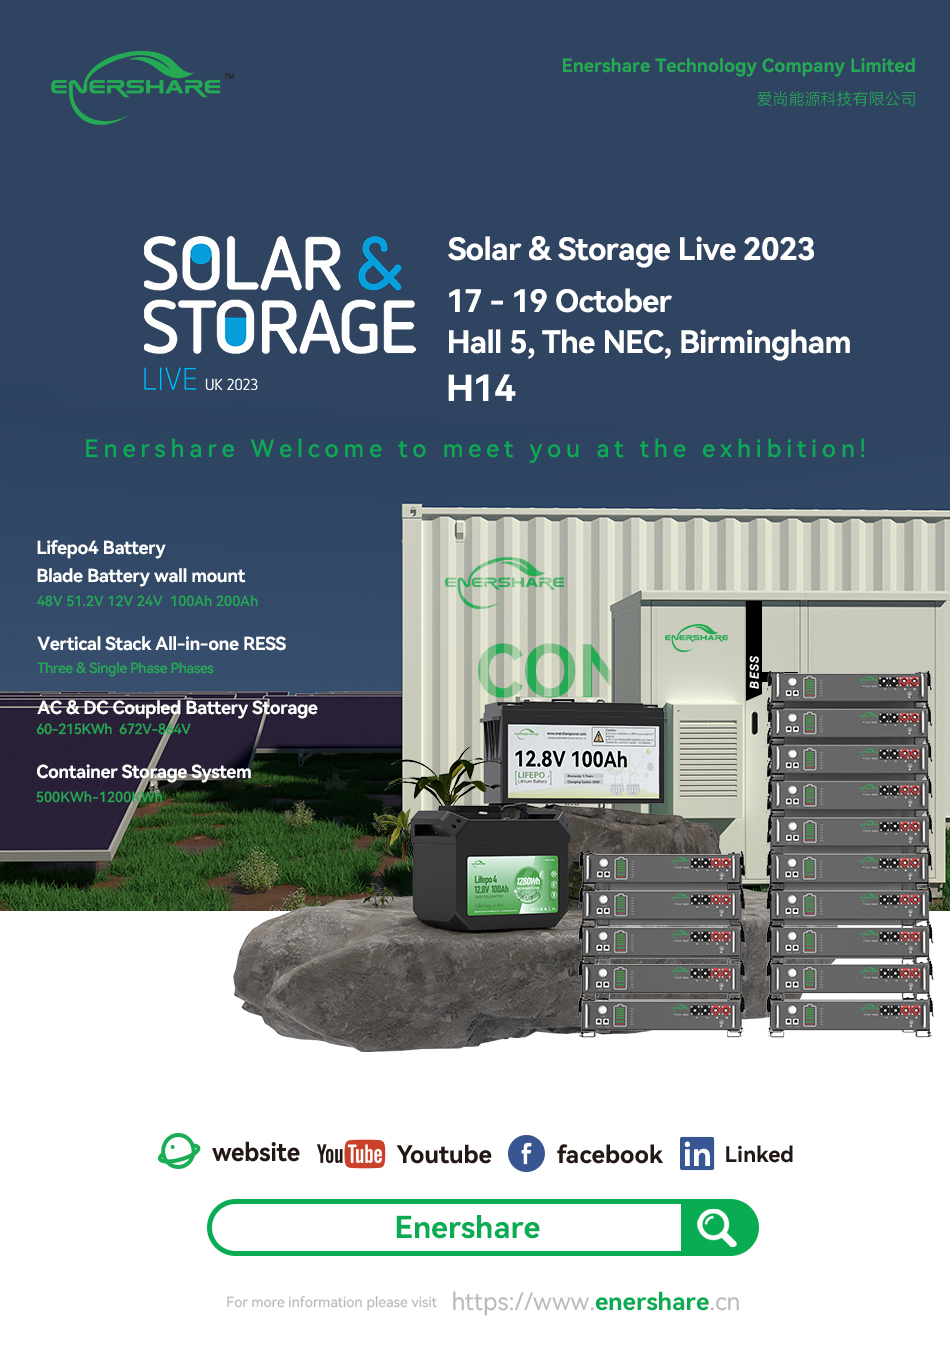 Enershare Energy will be at Solar & Storage Live UK 2023!